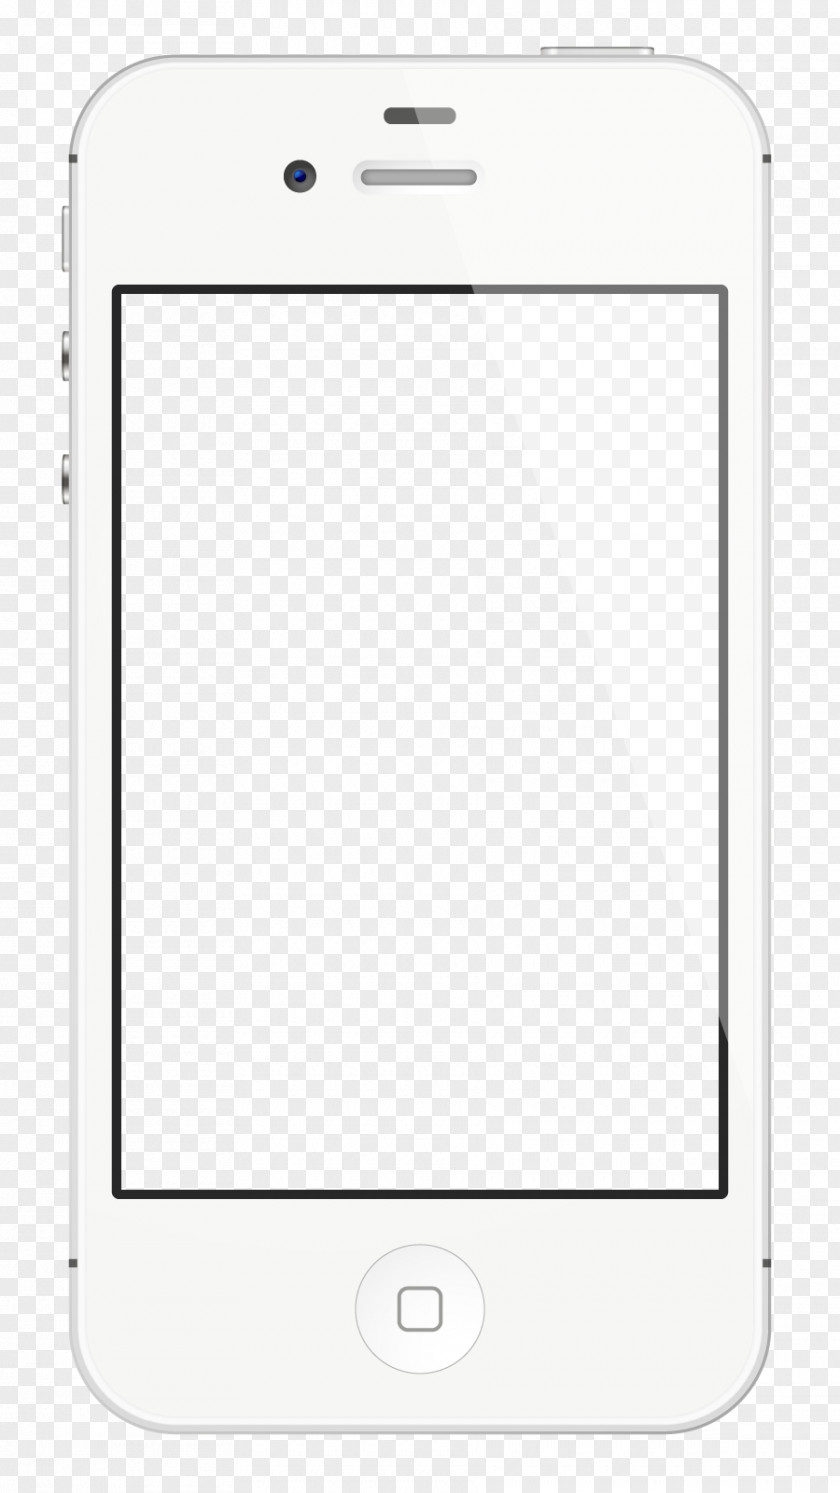 Template IPhone Portable Communications Device Technology Gadget PNG